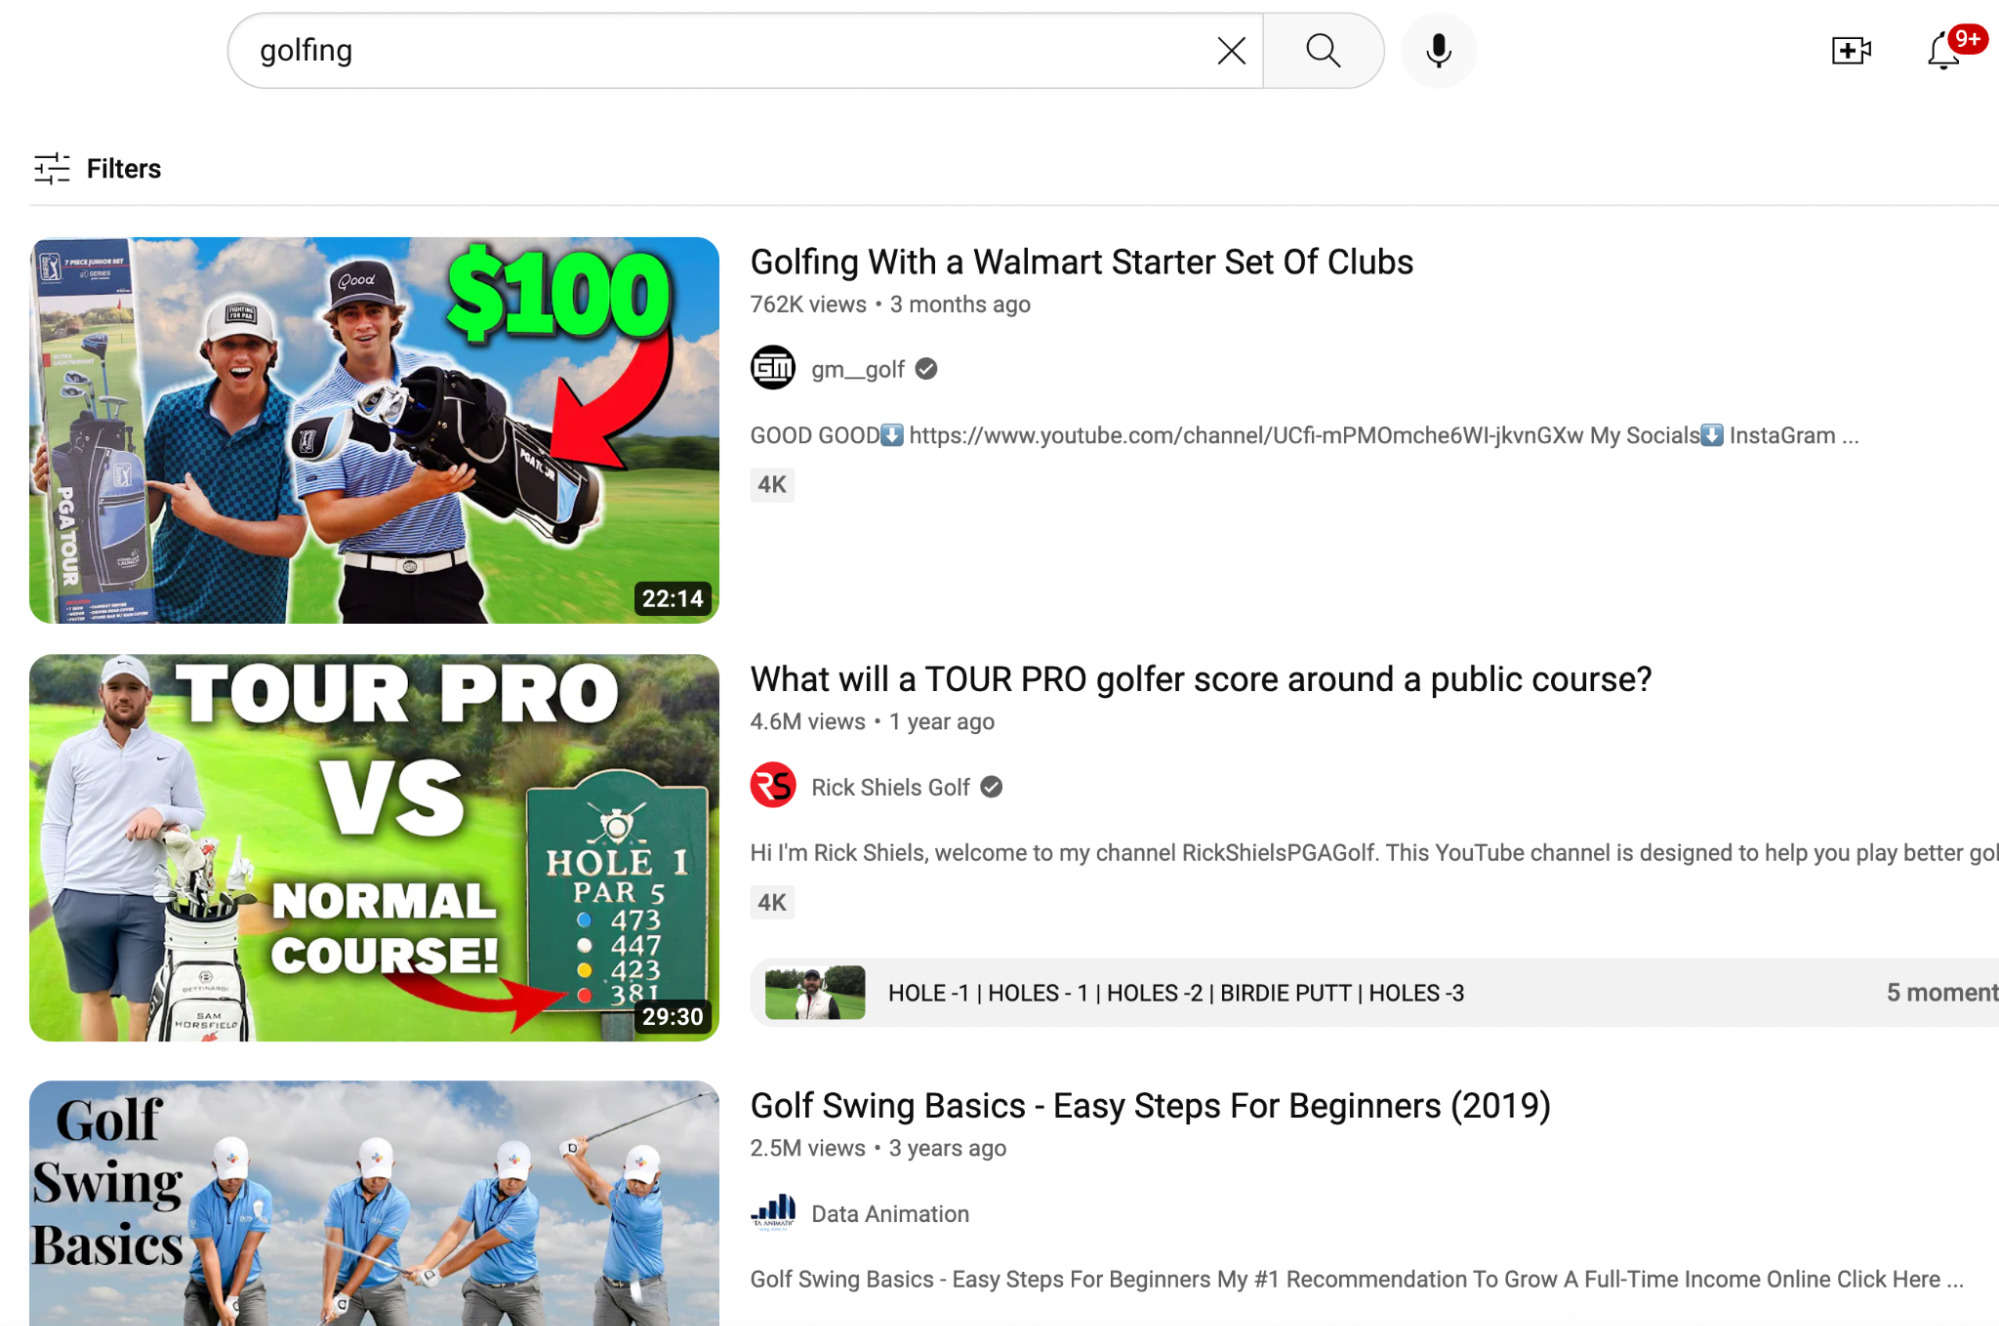 YouTube search results for "golfing"